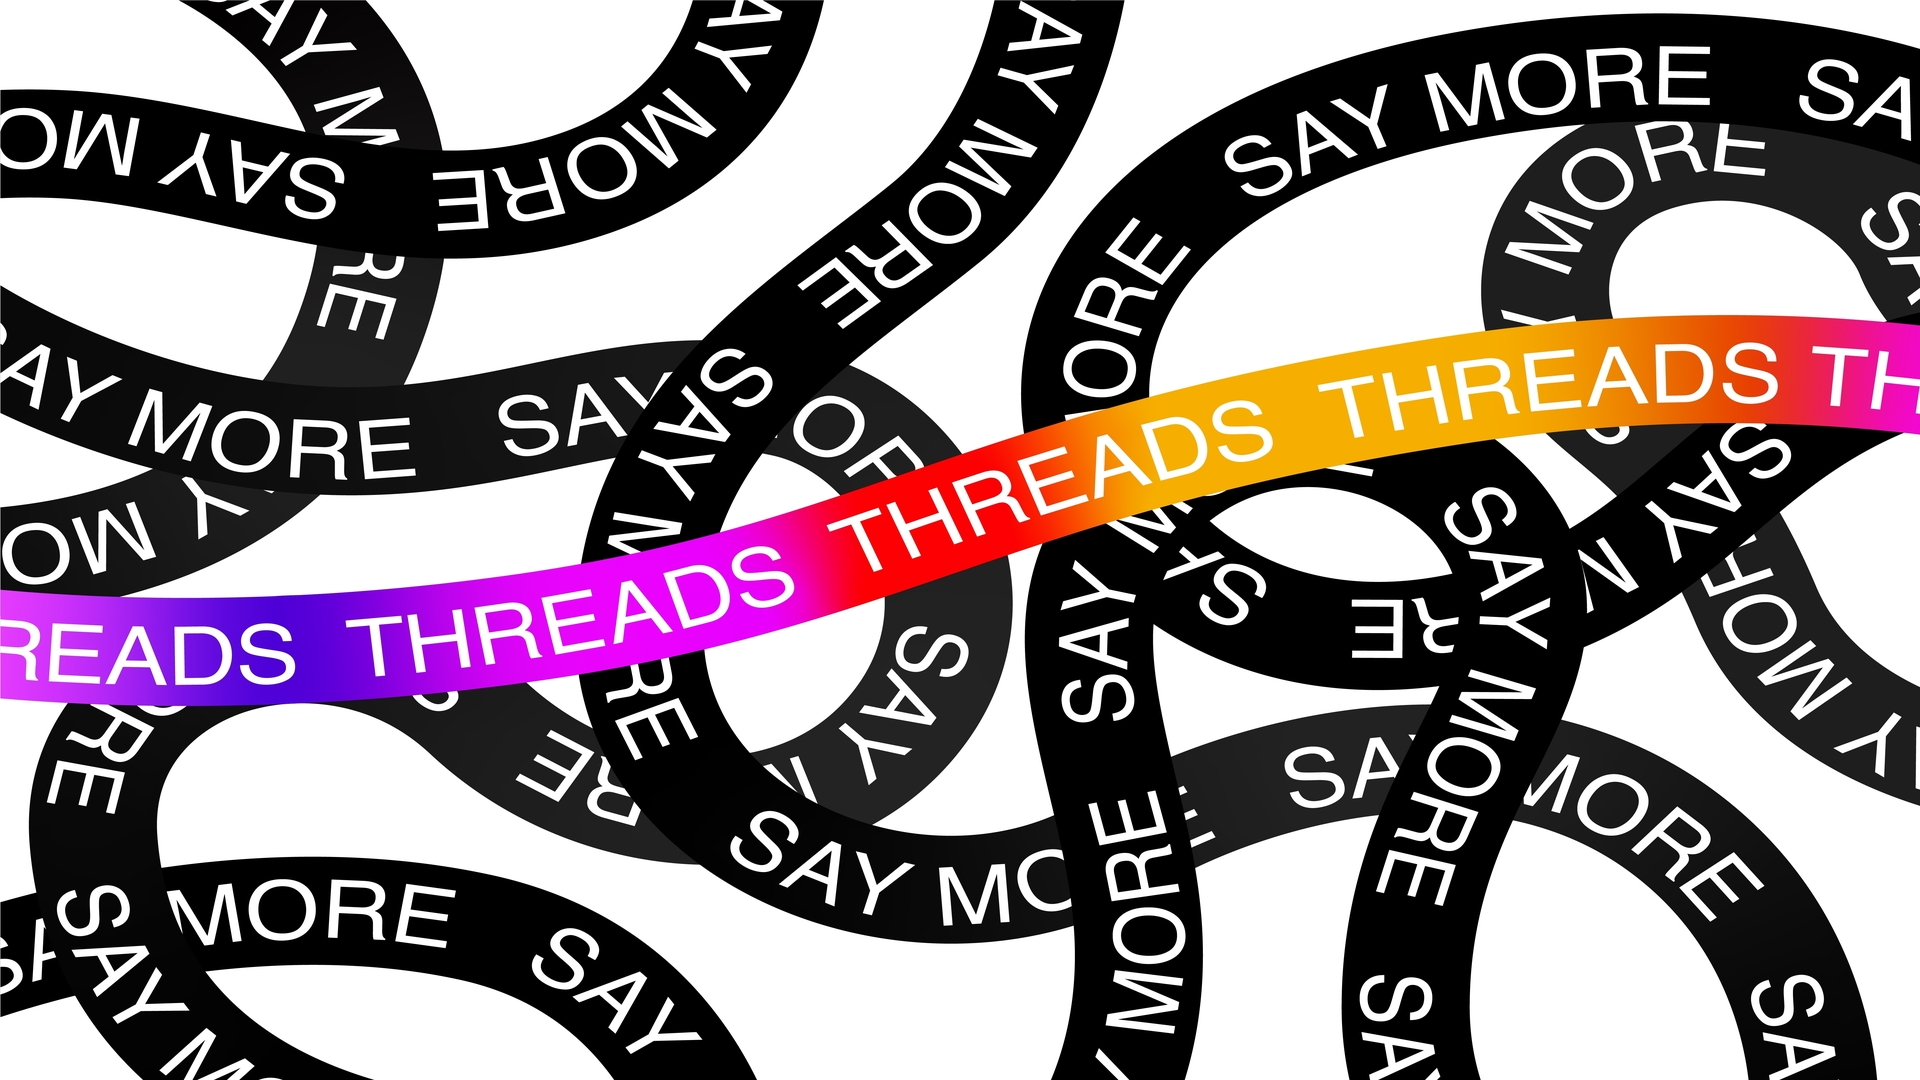 Using Threads for Business Marketing in Dubai